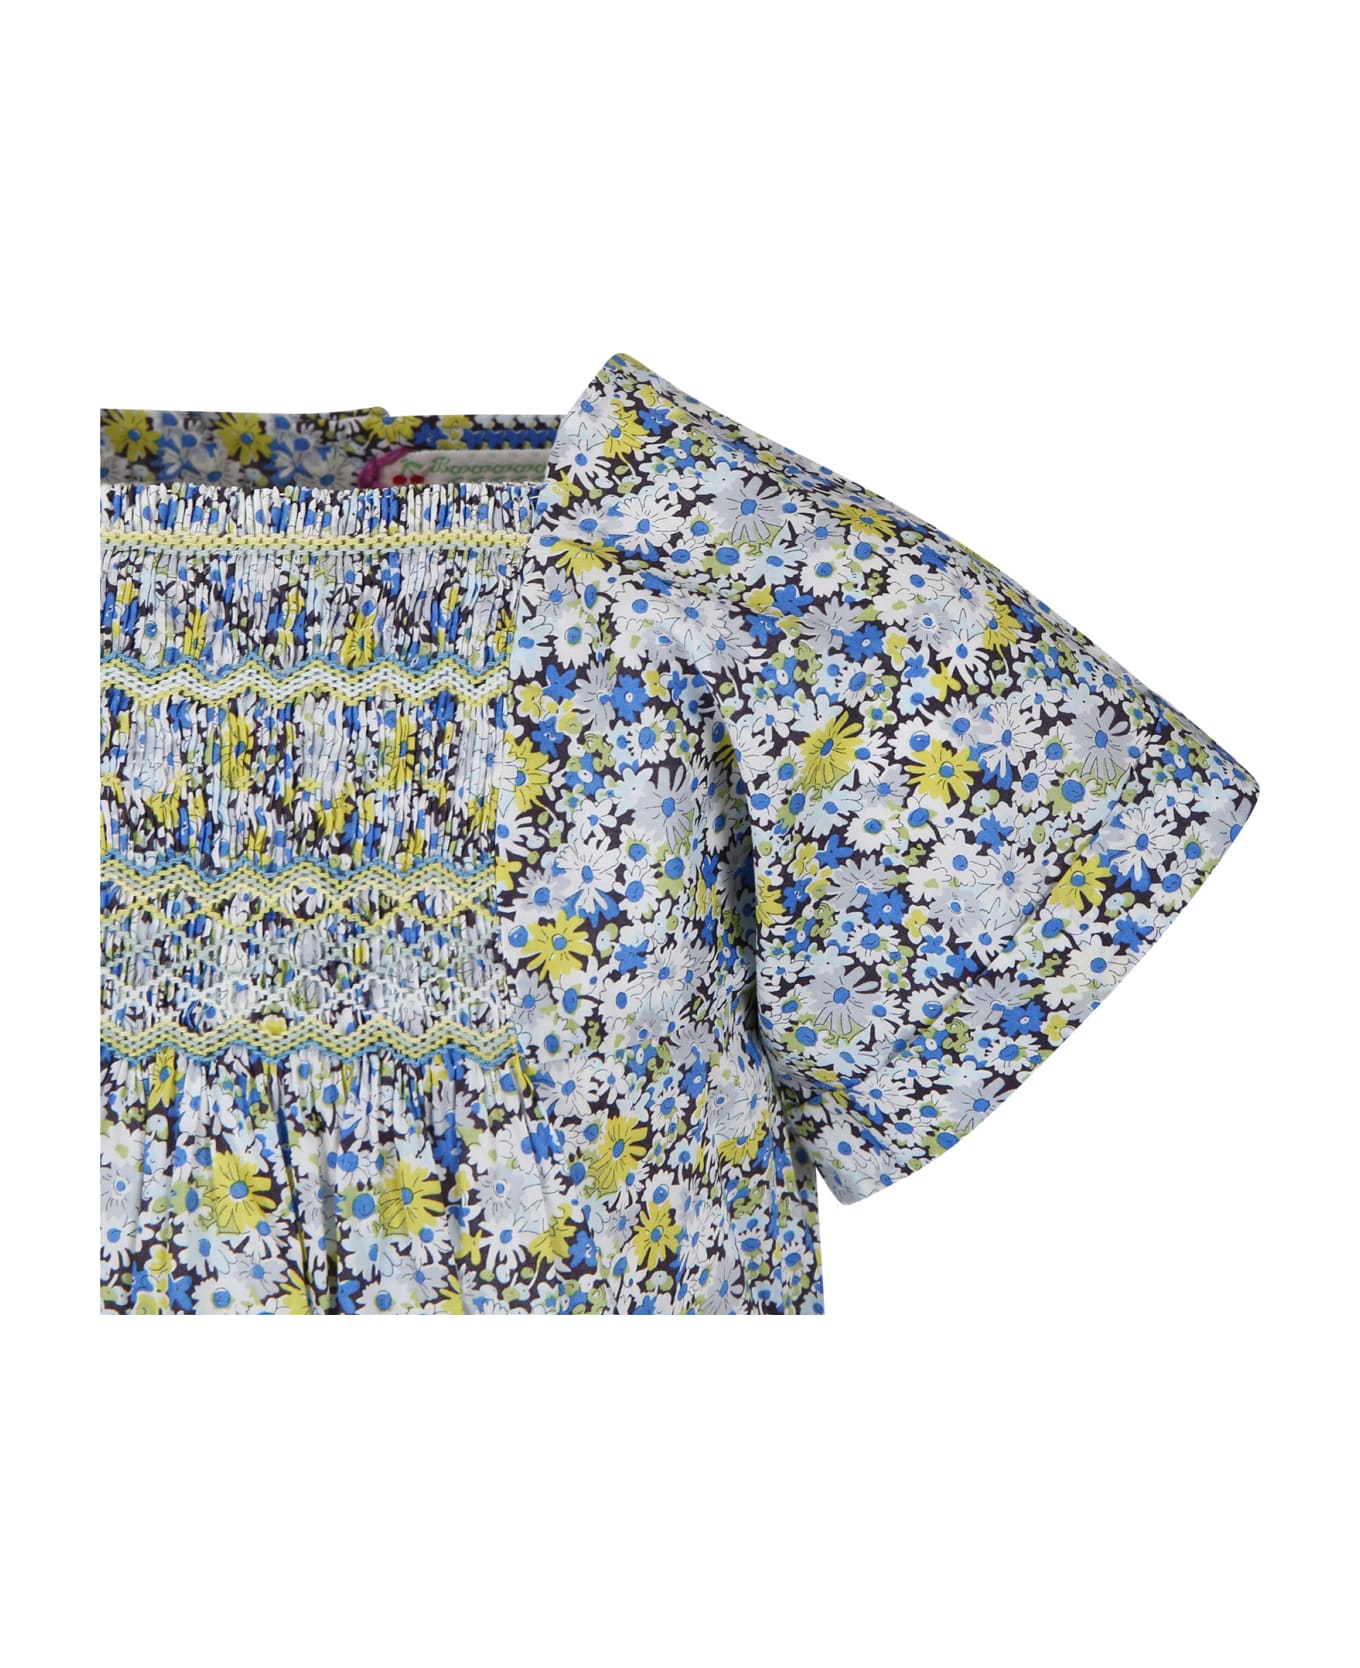 Bonpoint Light Blue For Girl With Floral Print - Multicolore トップス